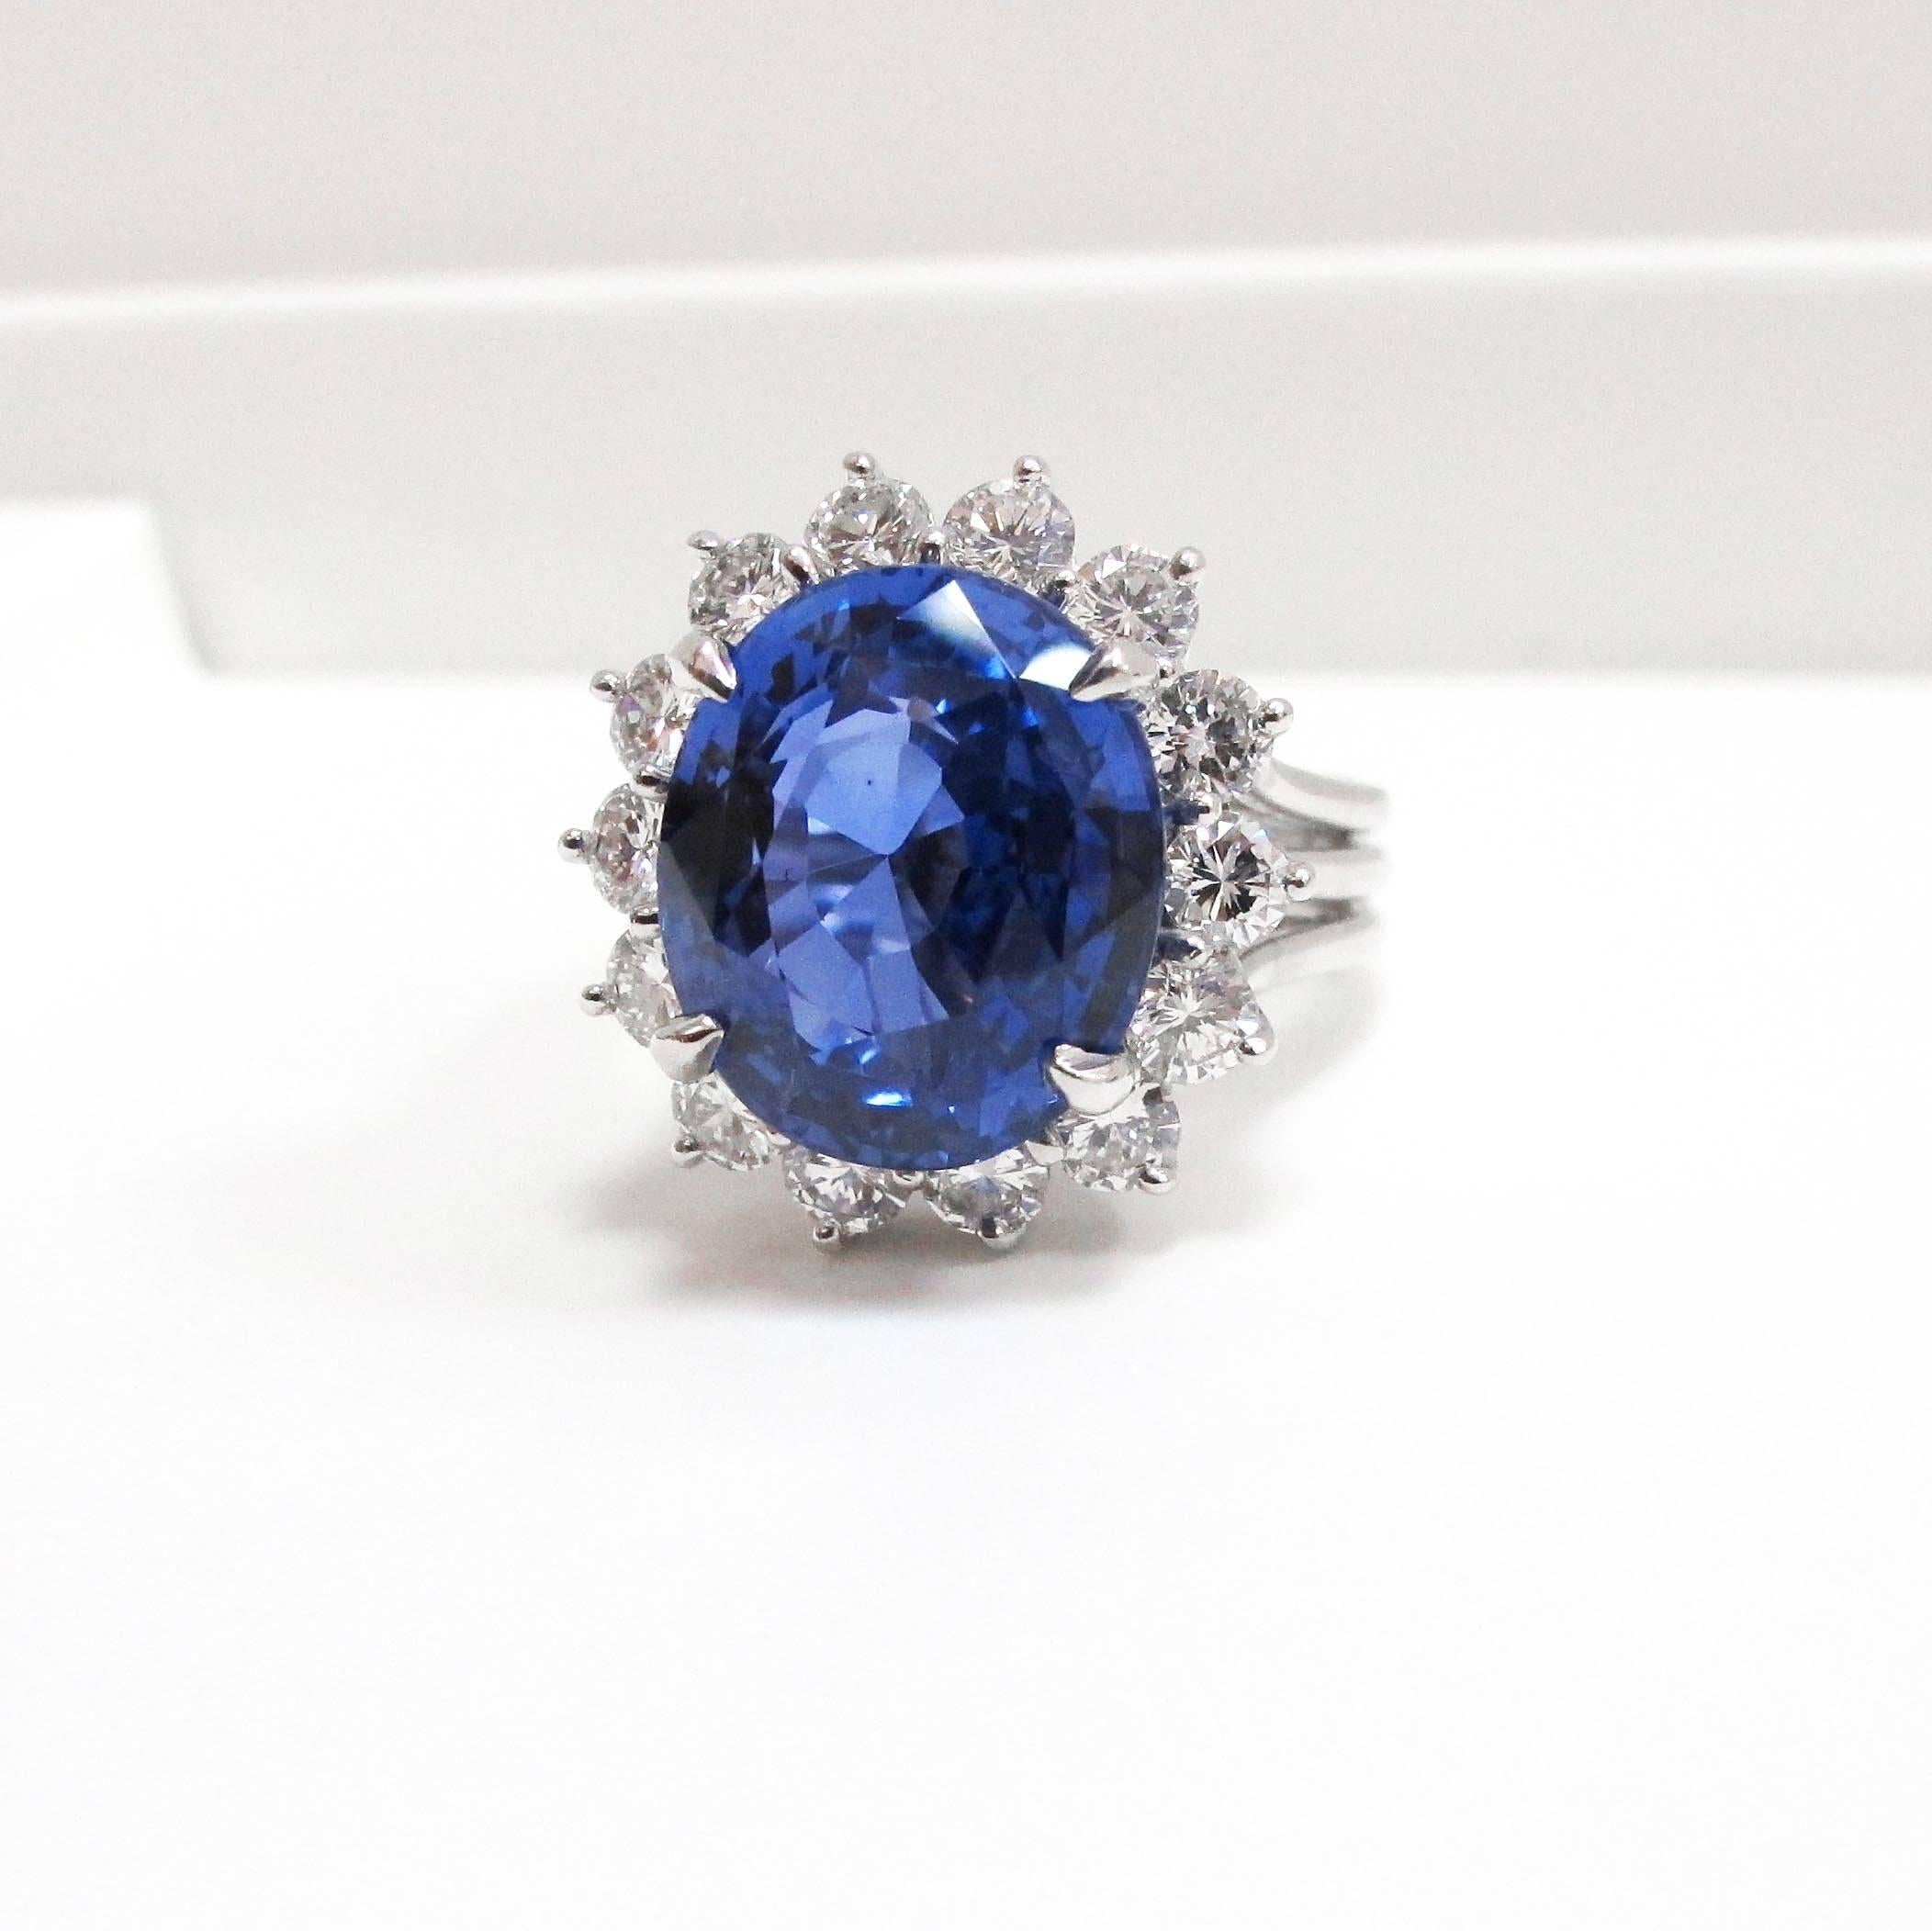 Wow! A true showstopper of a sapphire ring. This 12.19 Ceylon/Sri Lanka no heat sapphire ring is gorgeous. It is extremely rare for a sapphire of this size to have this type of color in it's natural state. Over 90% of sapphires are heated to